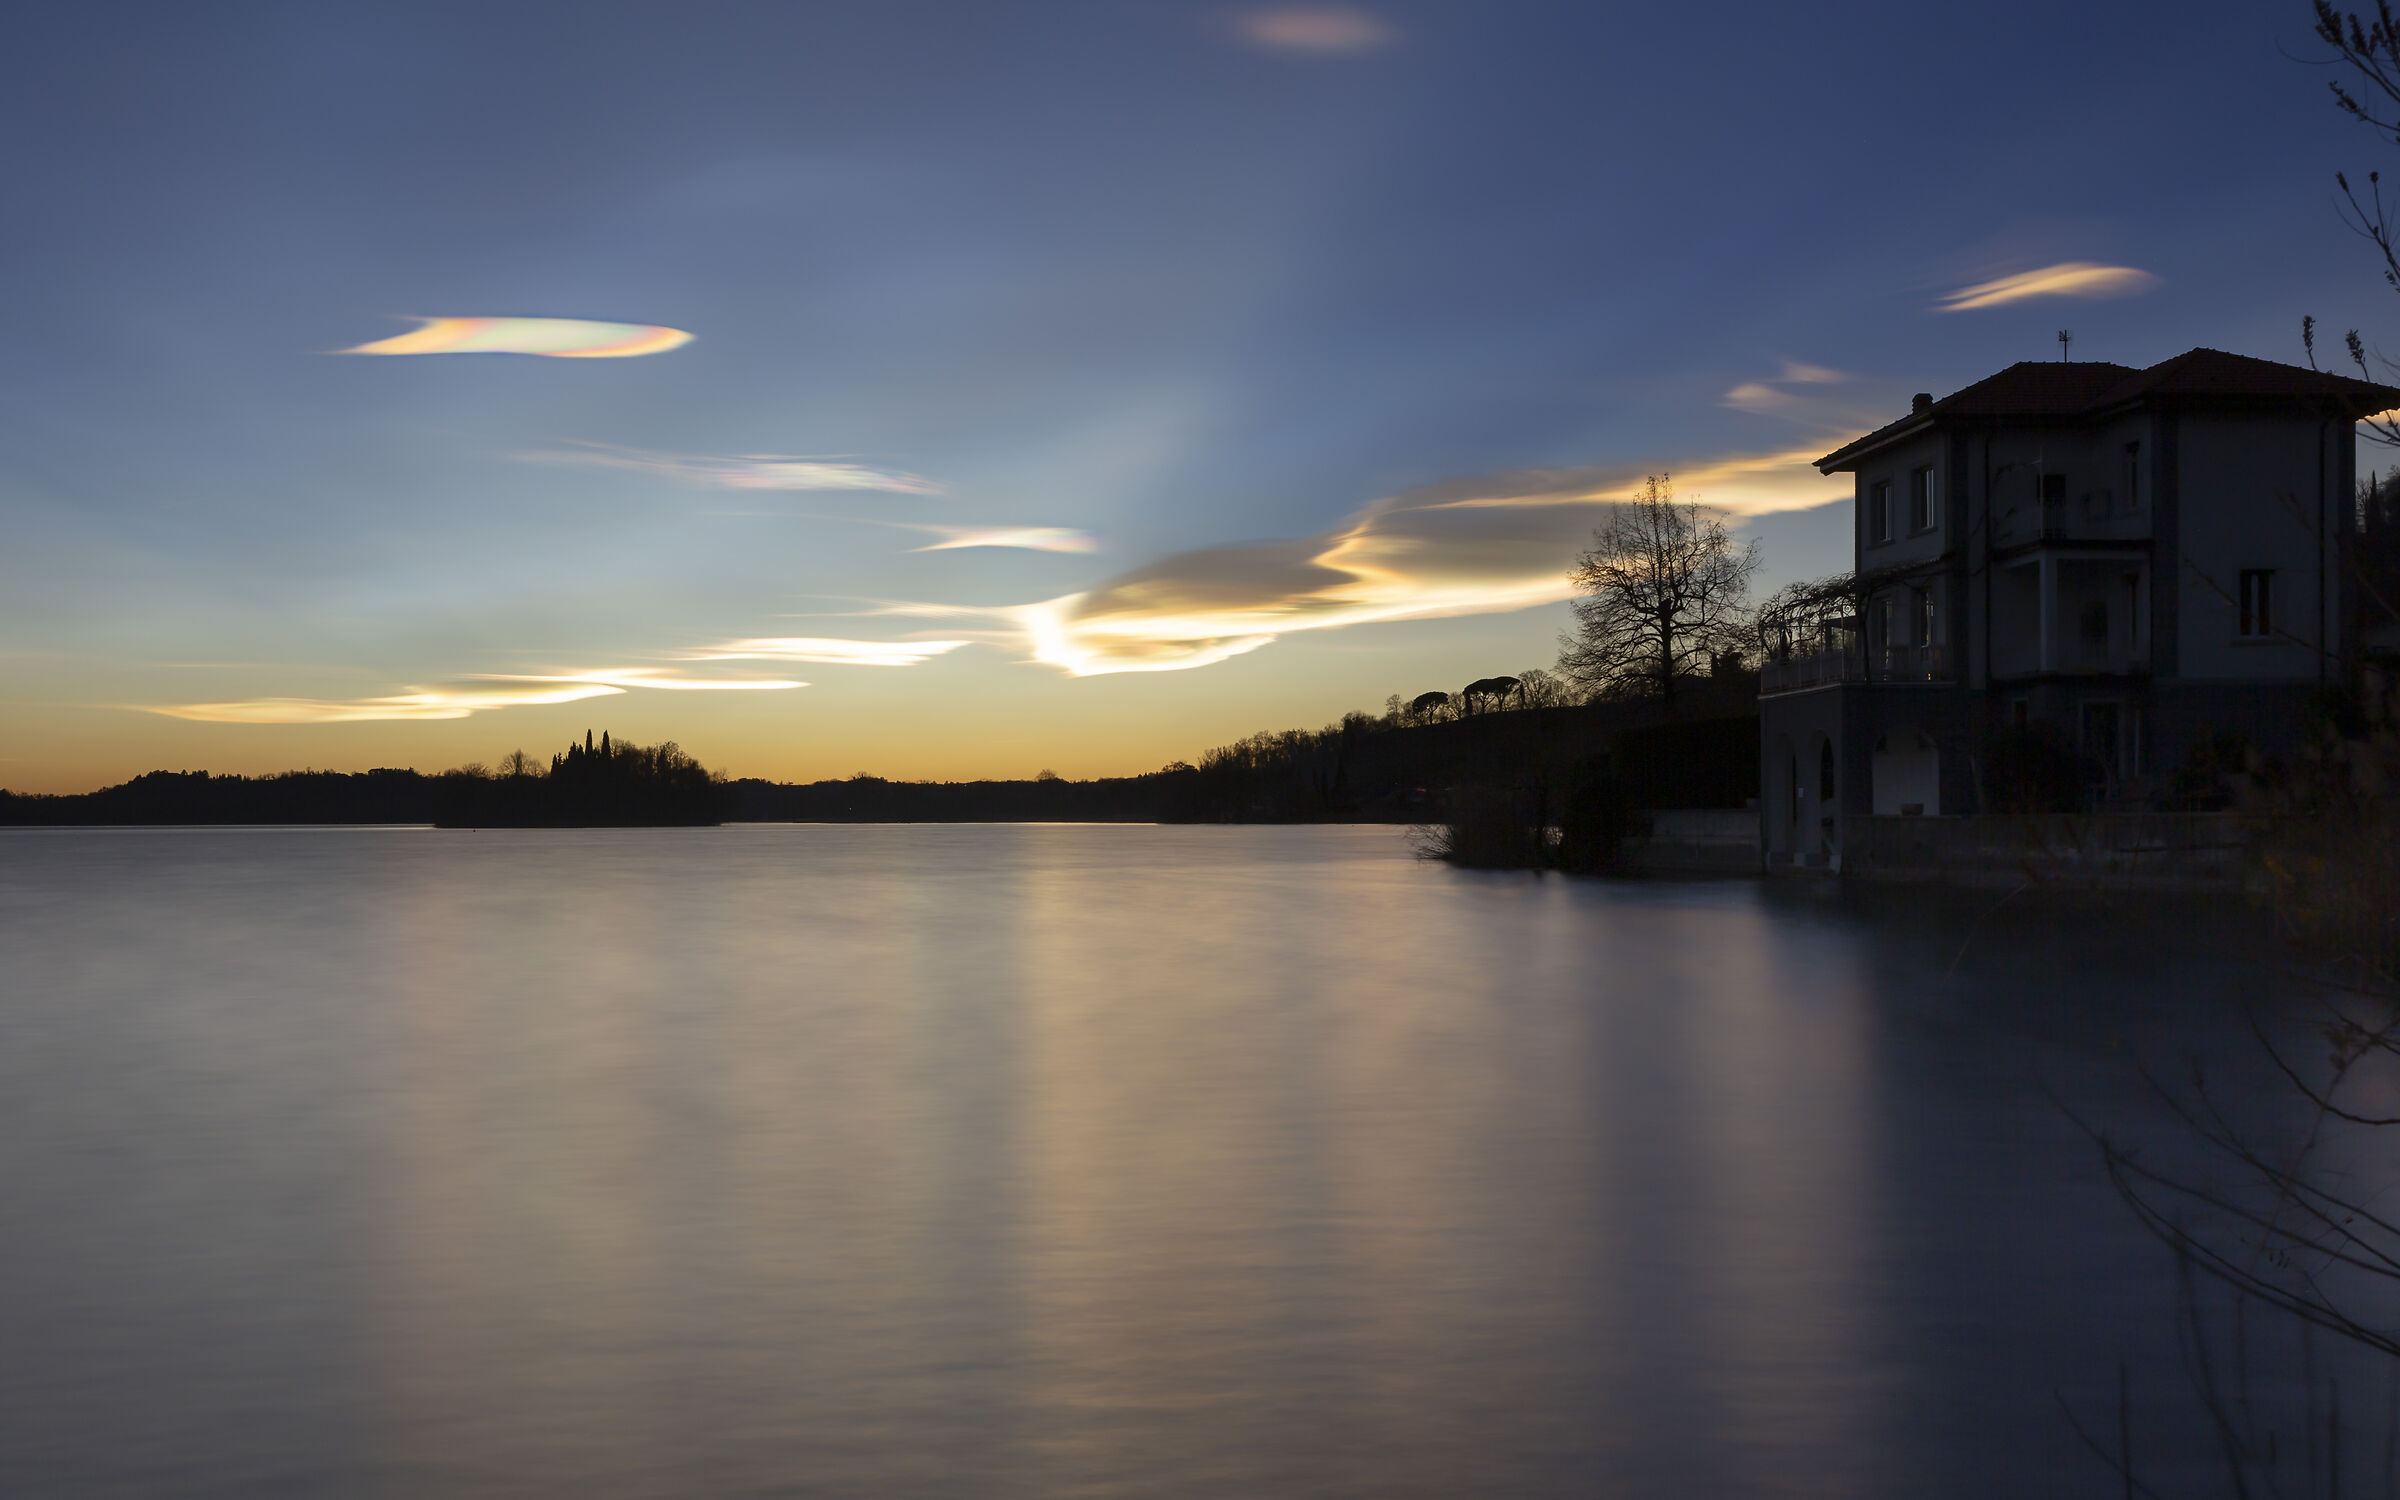 Iridescent clouds over Lake Pusiano...